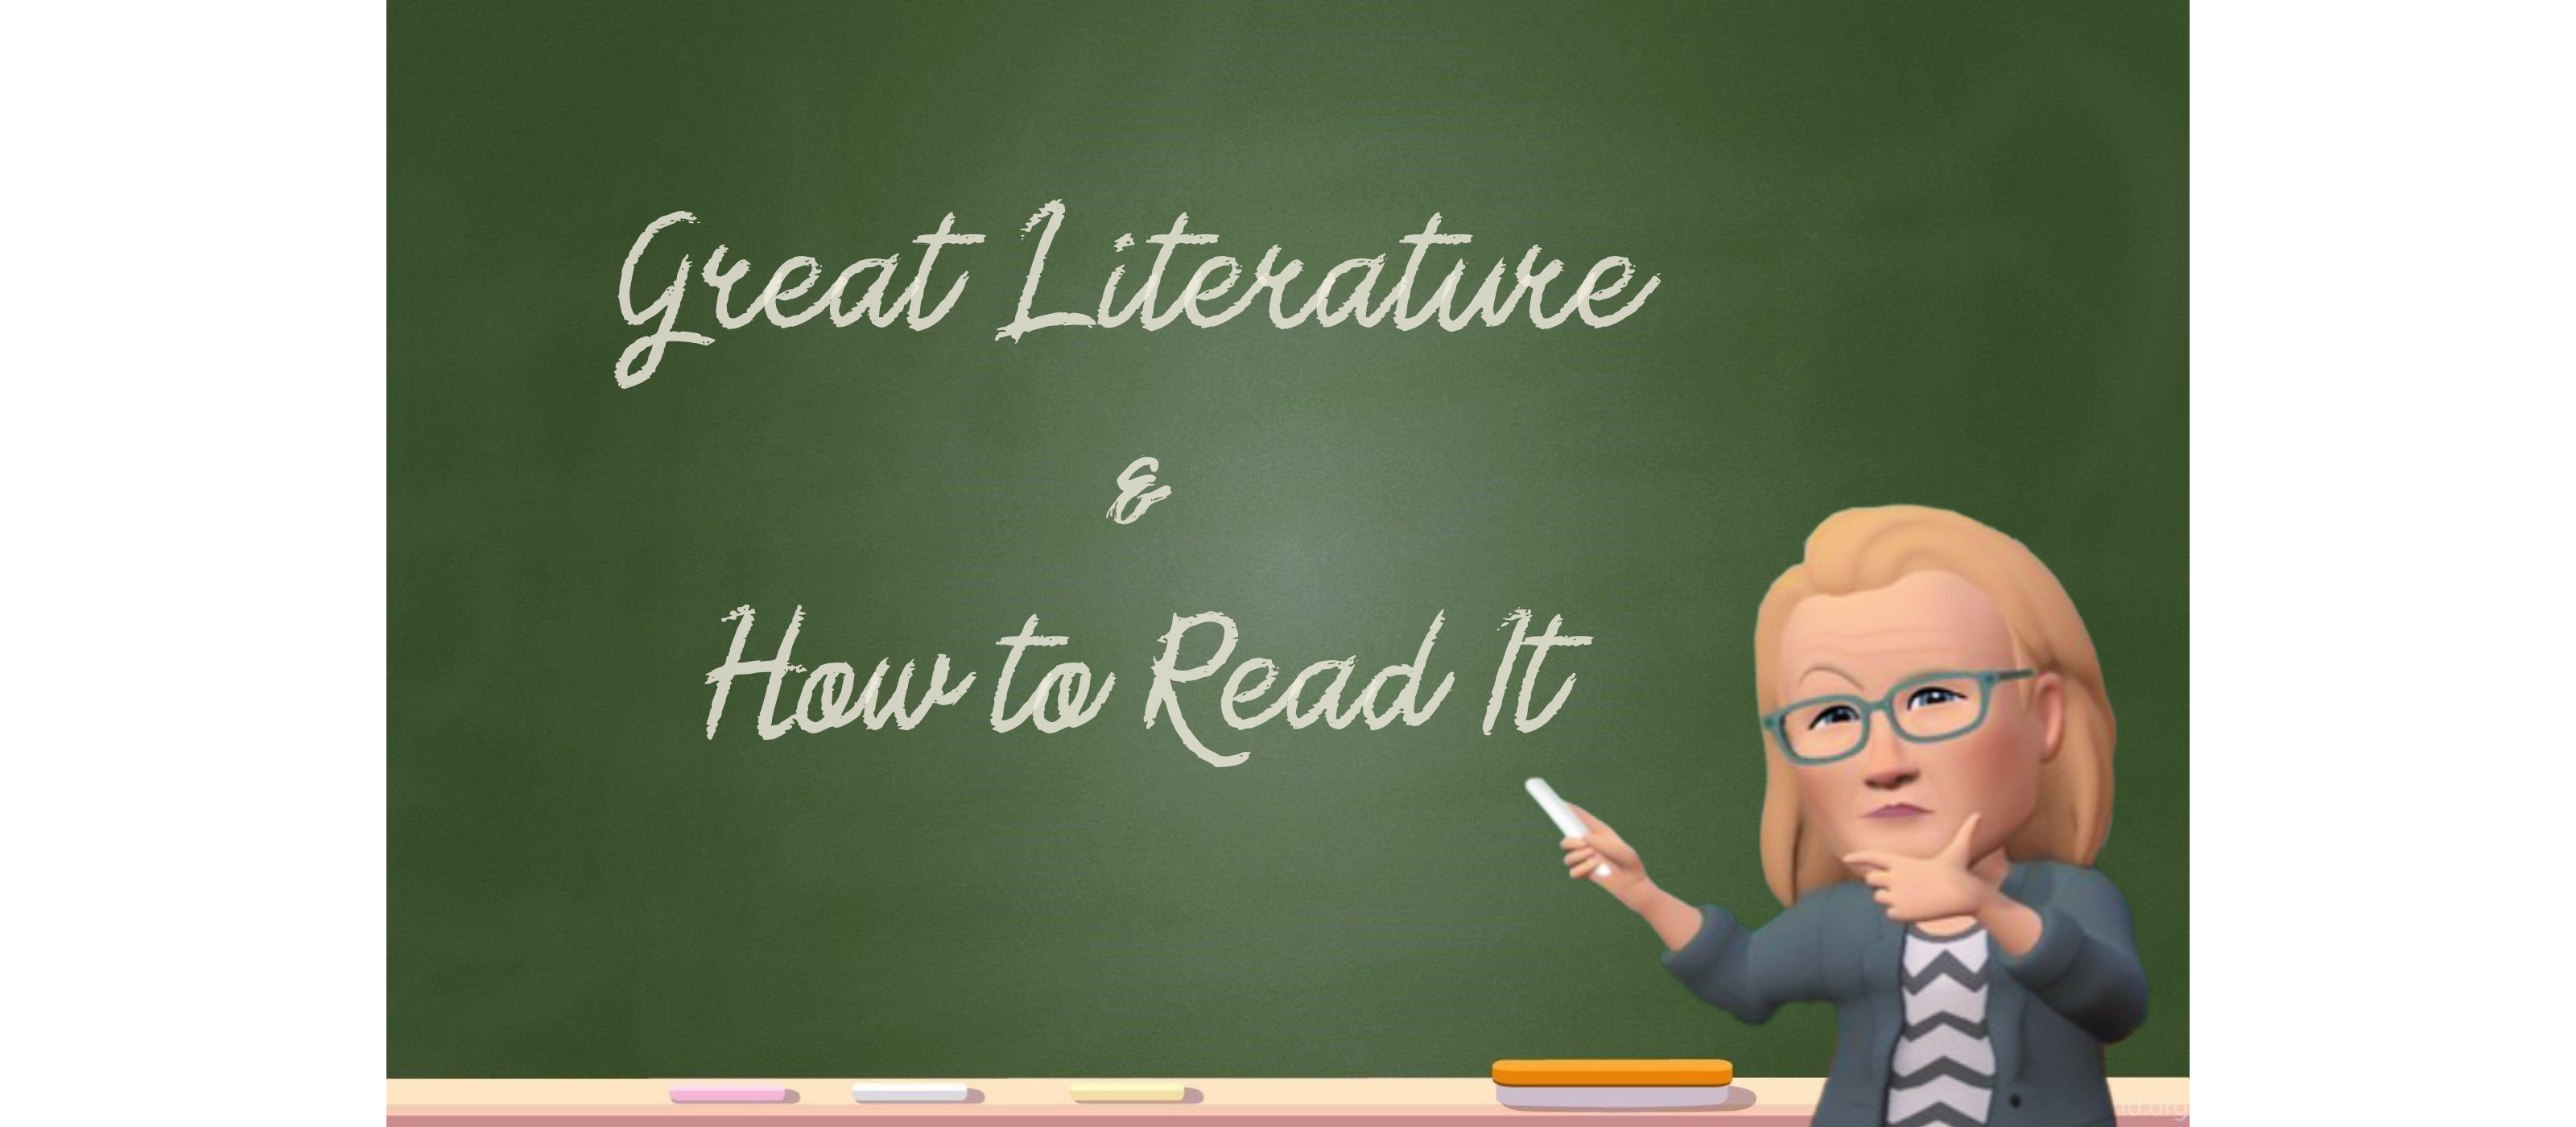 Woman at chalkboard "Great Literature and How to Read It"